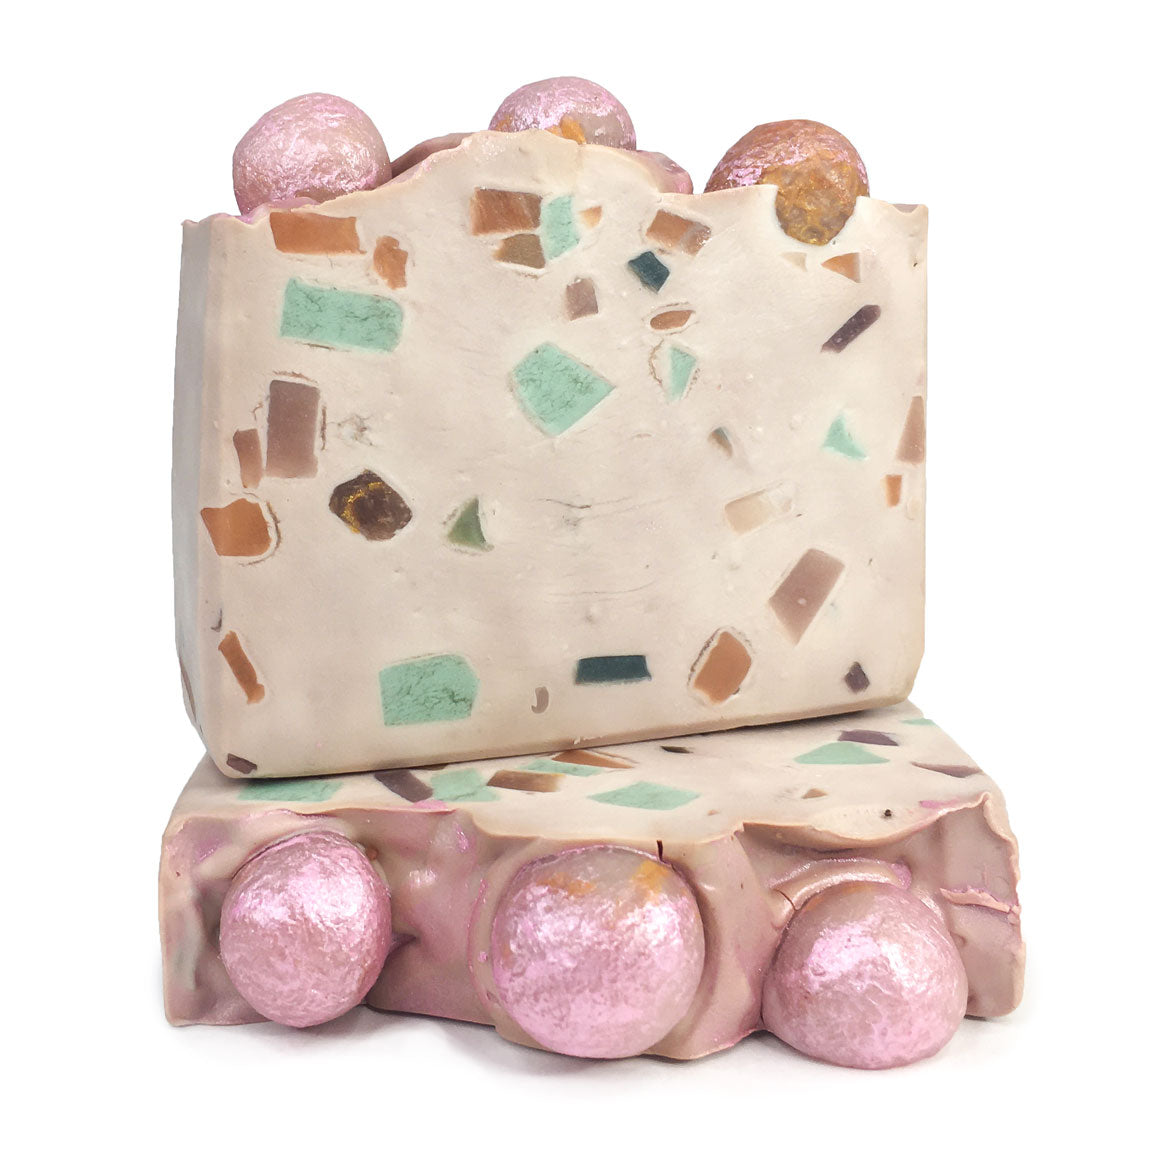 confetti soap bars with ball on top